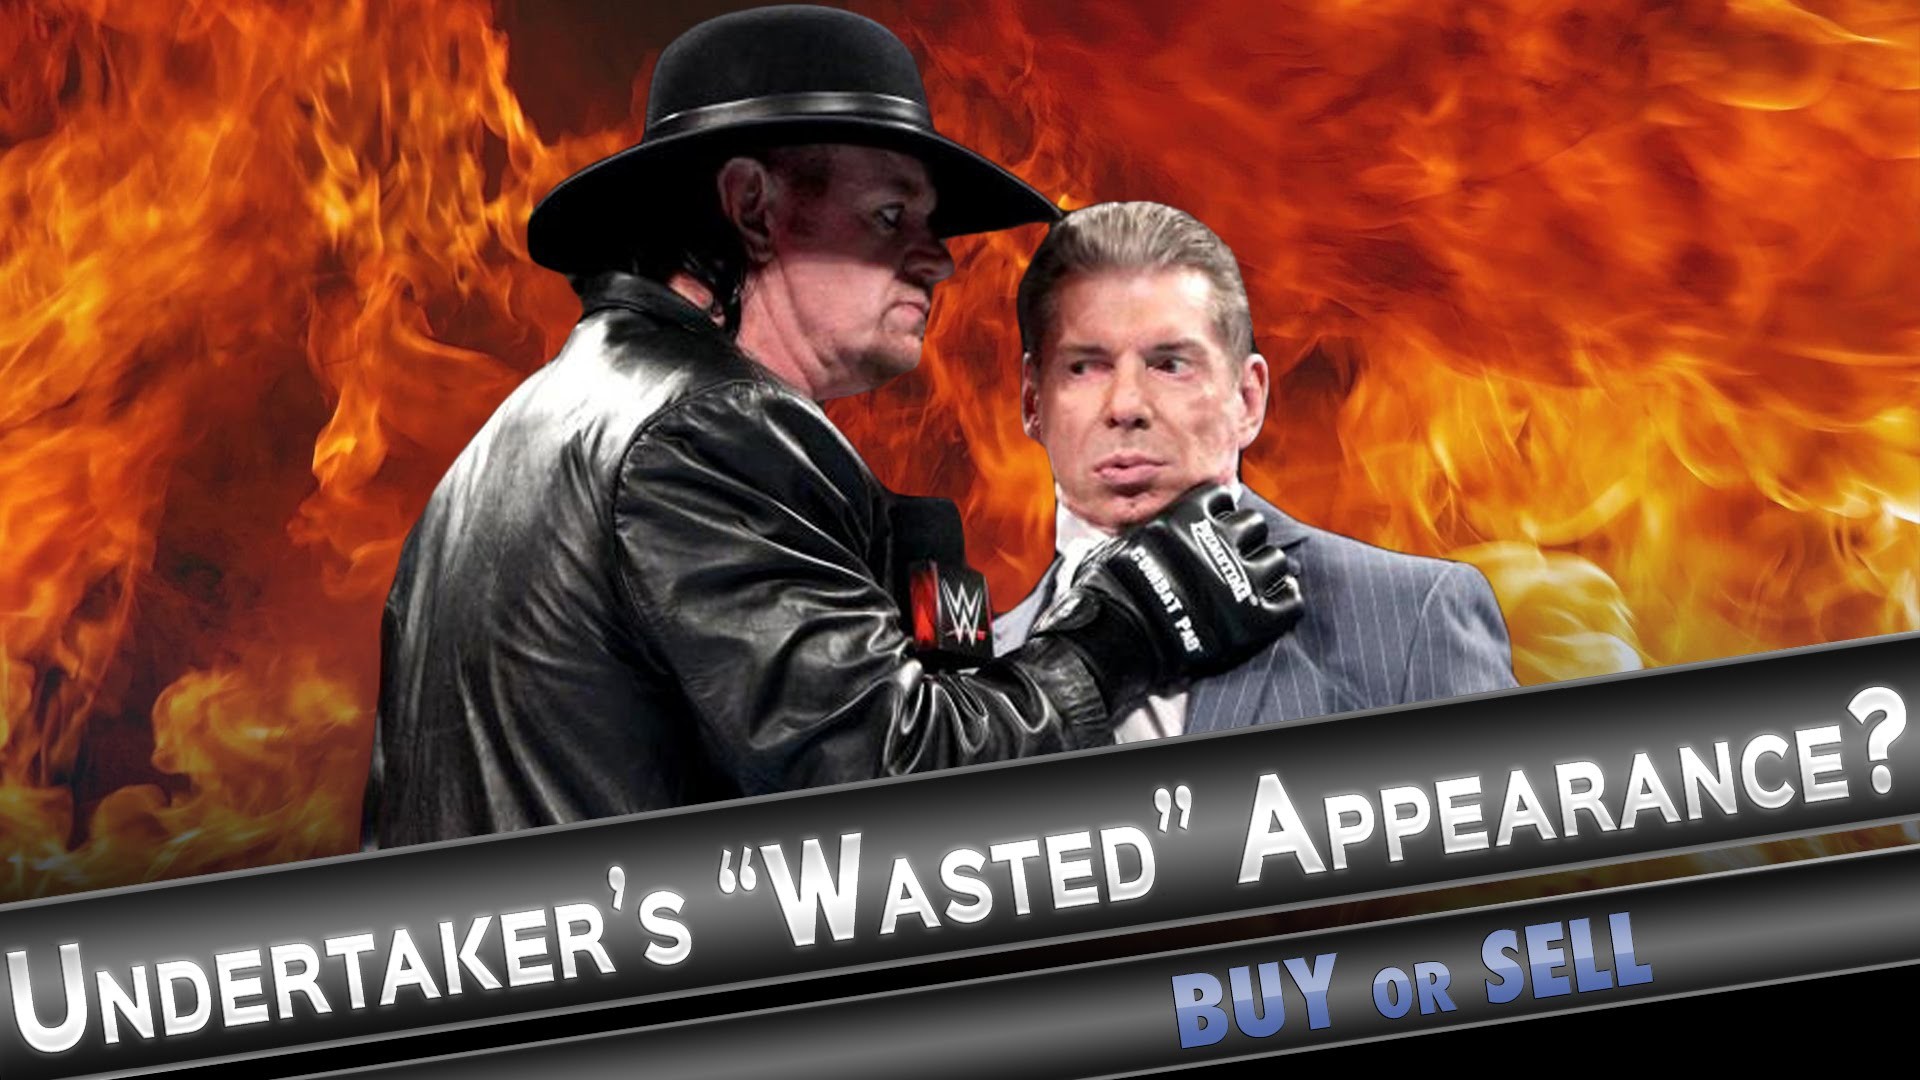 1920x1080 Undertaker confronts Vince over Shane McMahon/WrestleMania 32